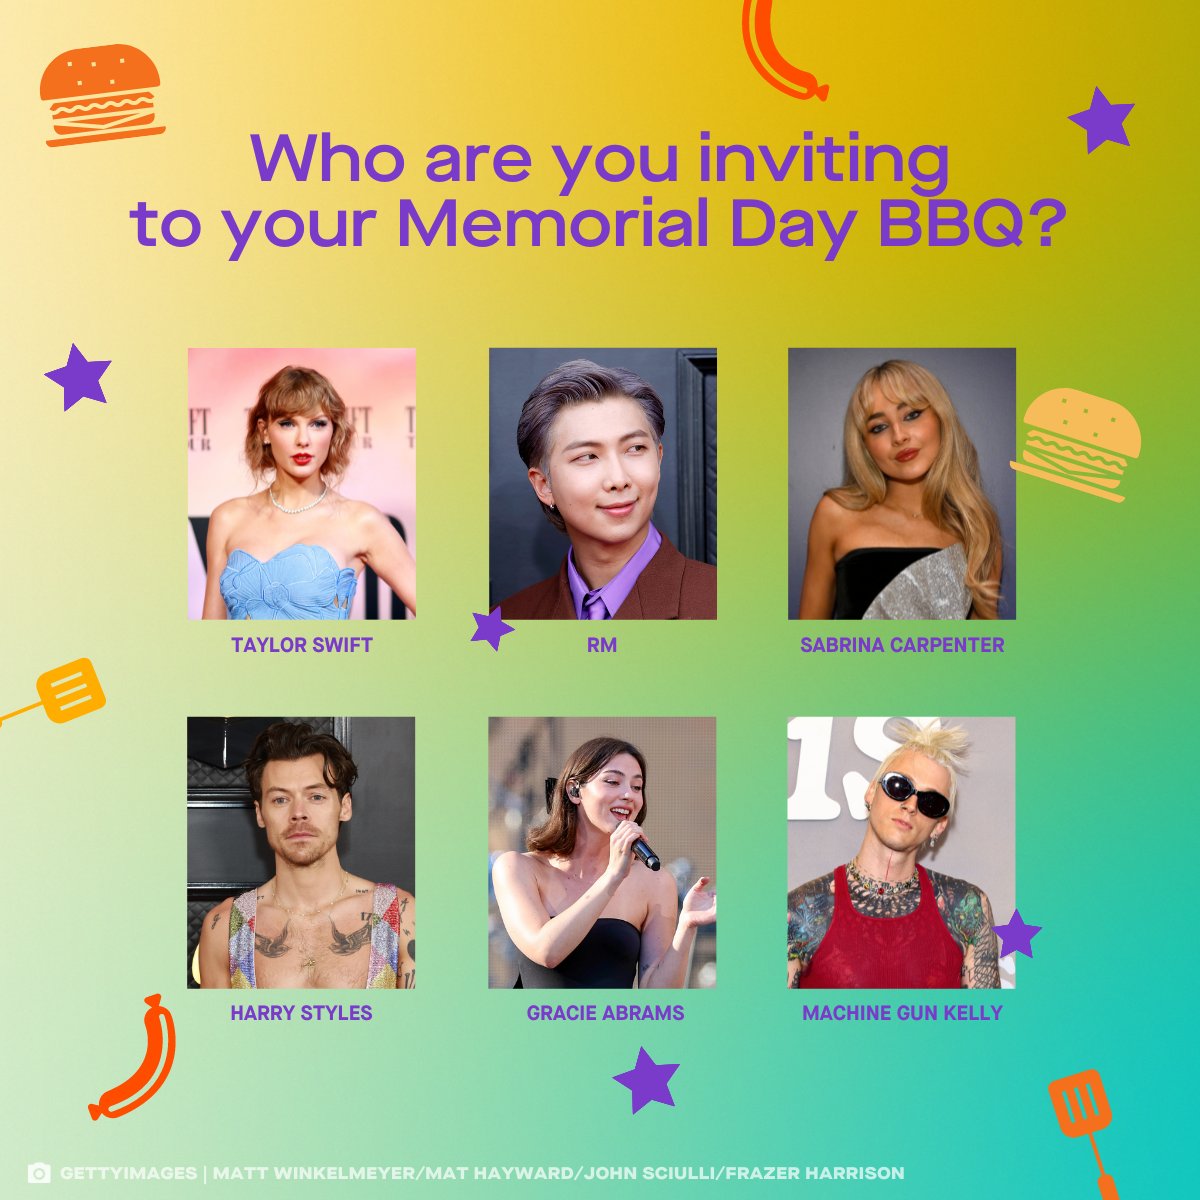 Crank up your grill and turn up 'Summer Hits' Radio this Memorial Day: auda.cy/SummerTW 🌭 🍔 ☀️ @taylorswift13 ☀️ RM of @BTS_twt ☀️ @SabrinaAnnLynn ☀️ @Harry_Styles ☀️ @gracieabrams ☀️ @machinegunkelly